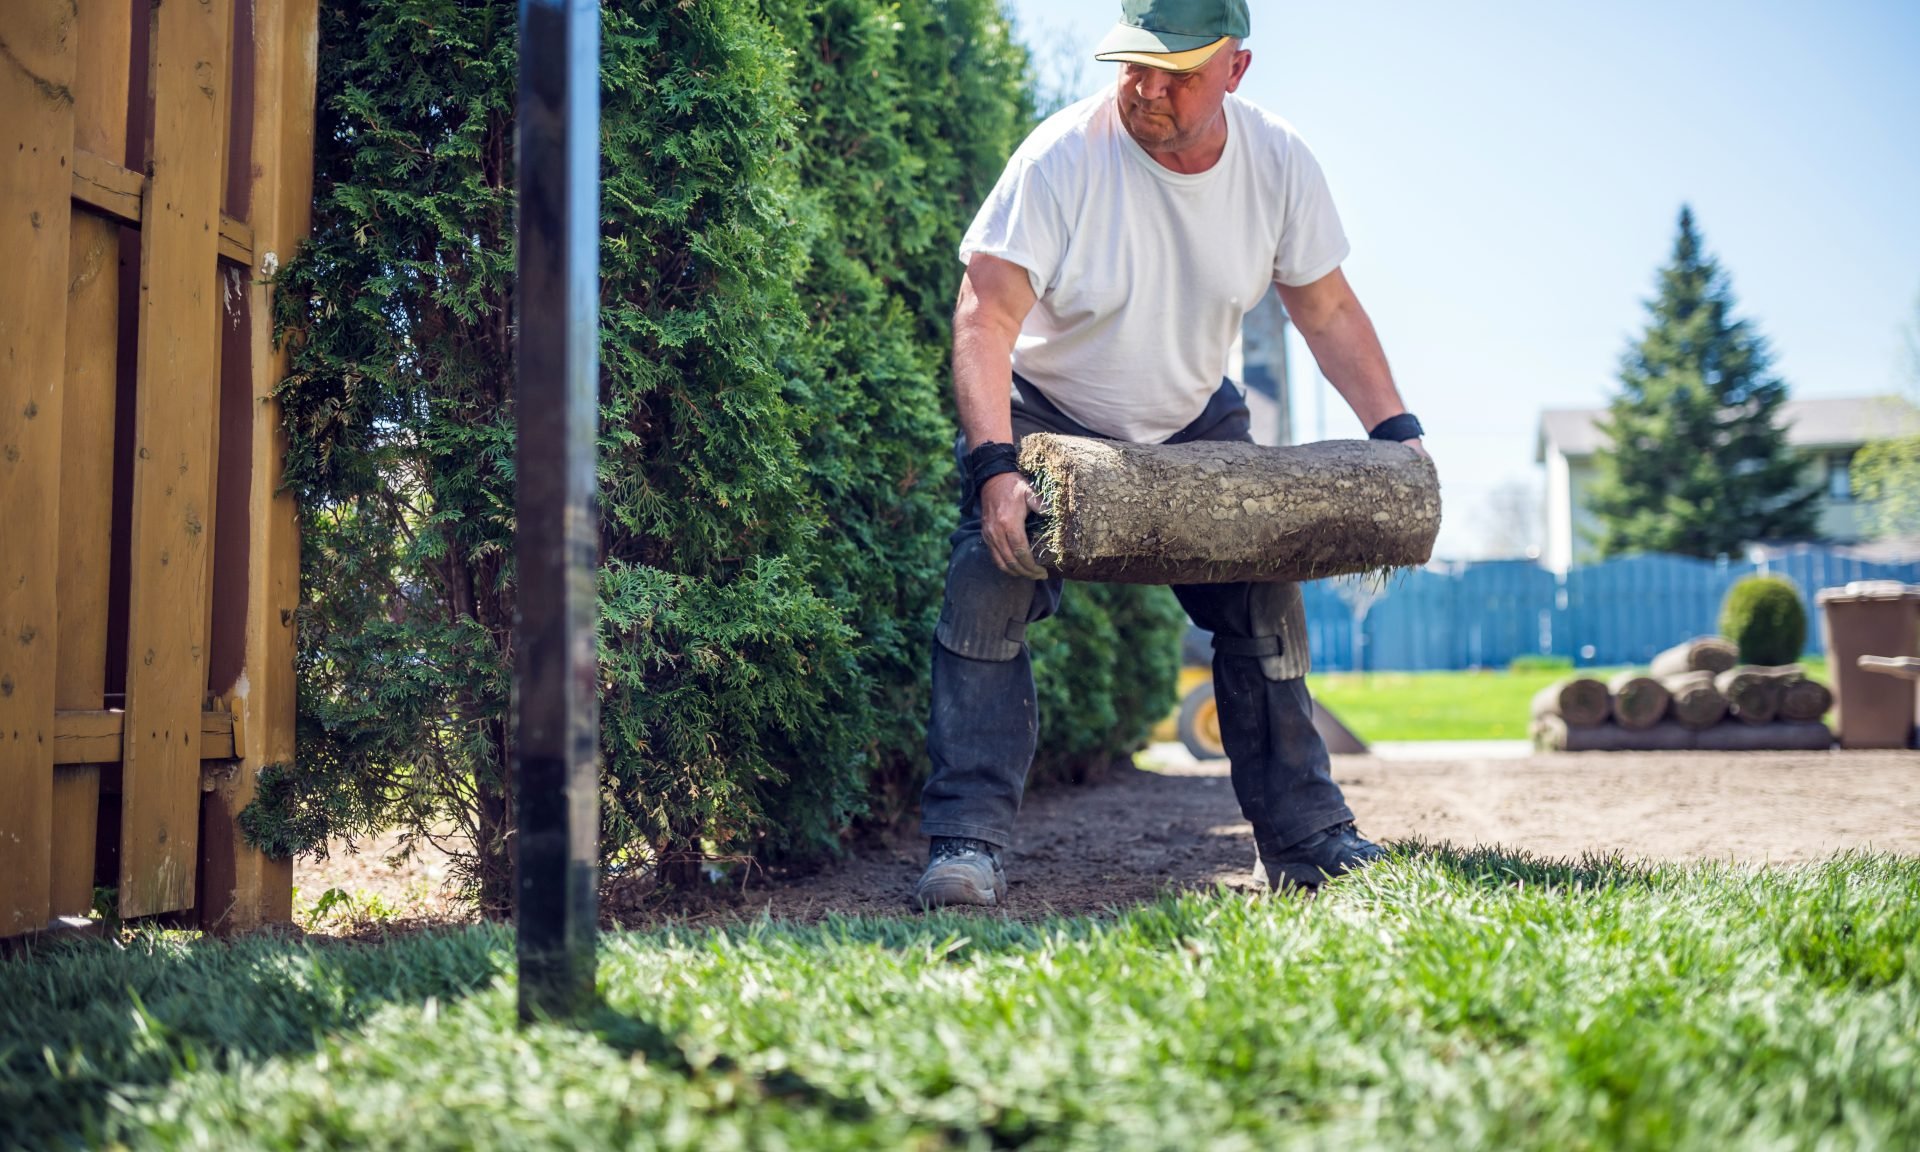 A Landscaping Or Lawn Care Business, Do Landscapers Make Good Money